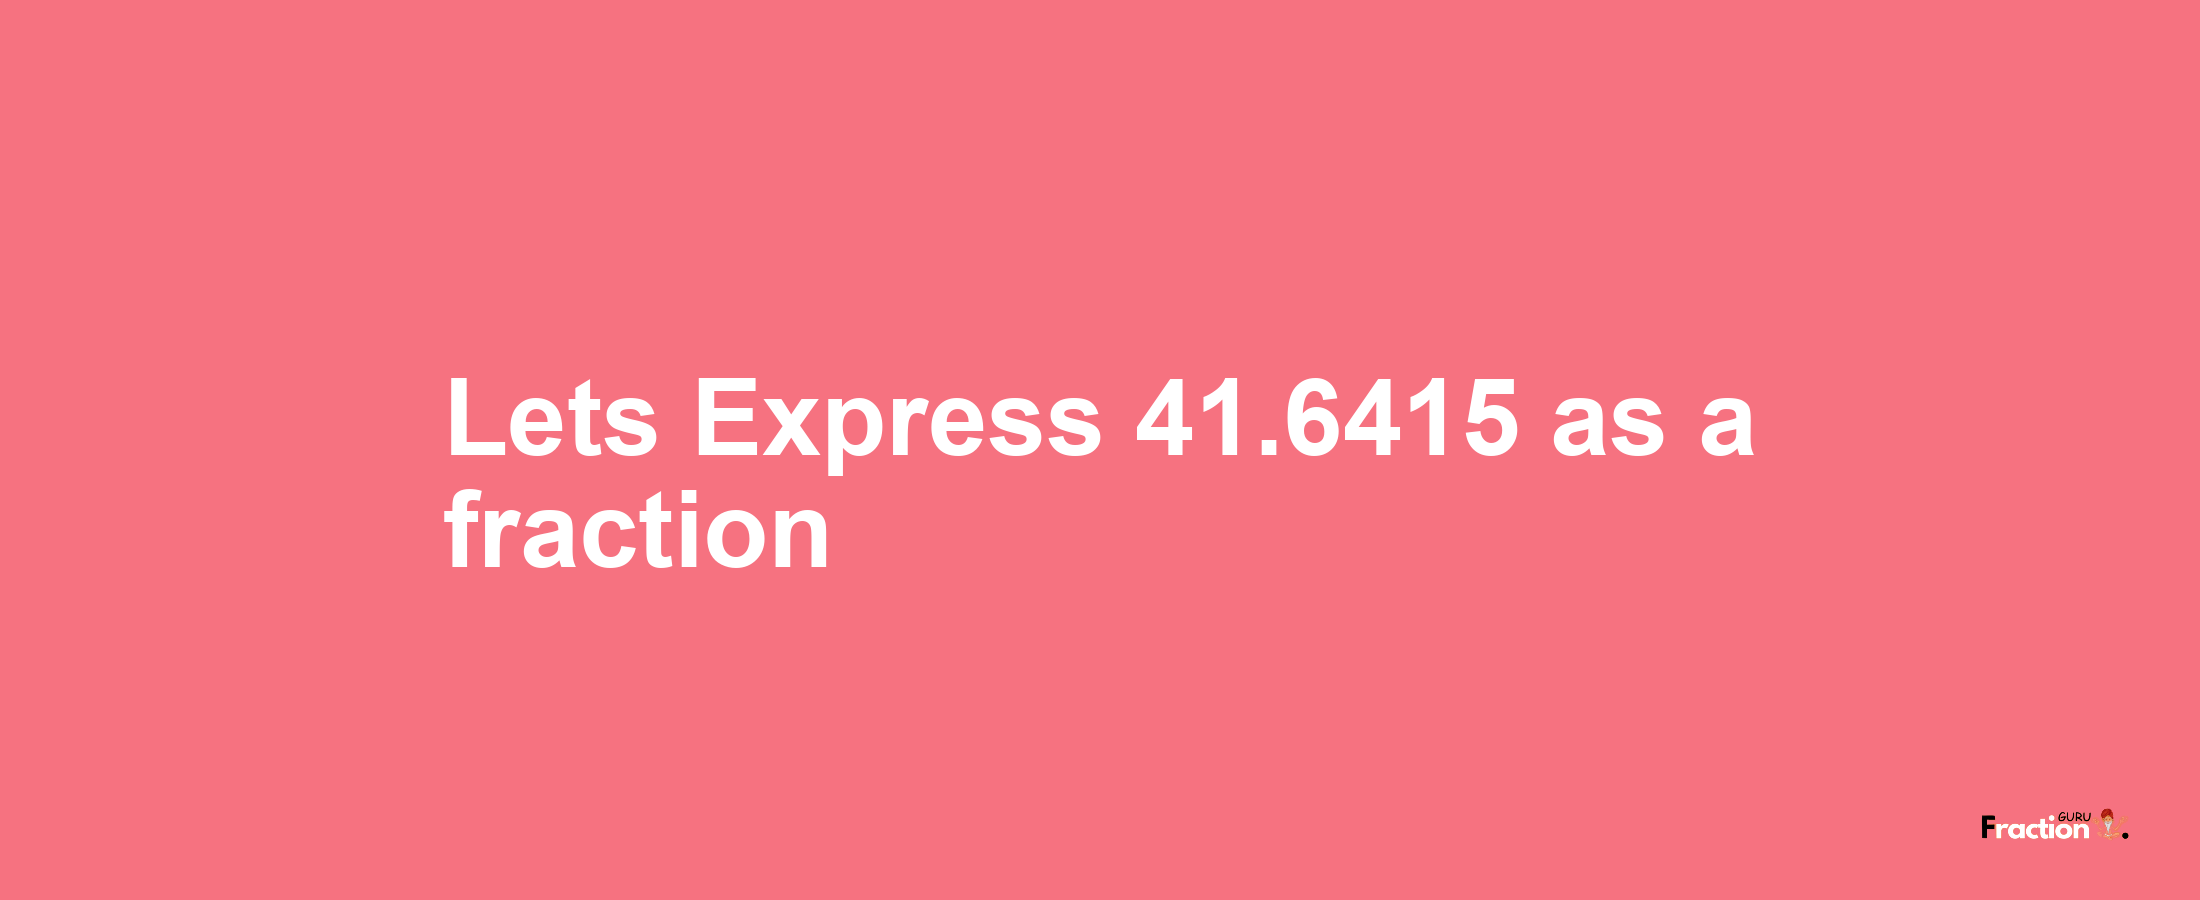 Lets Express 41.6415 as afraction